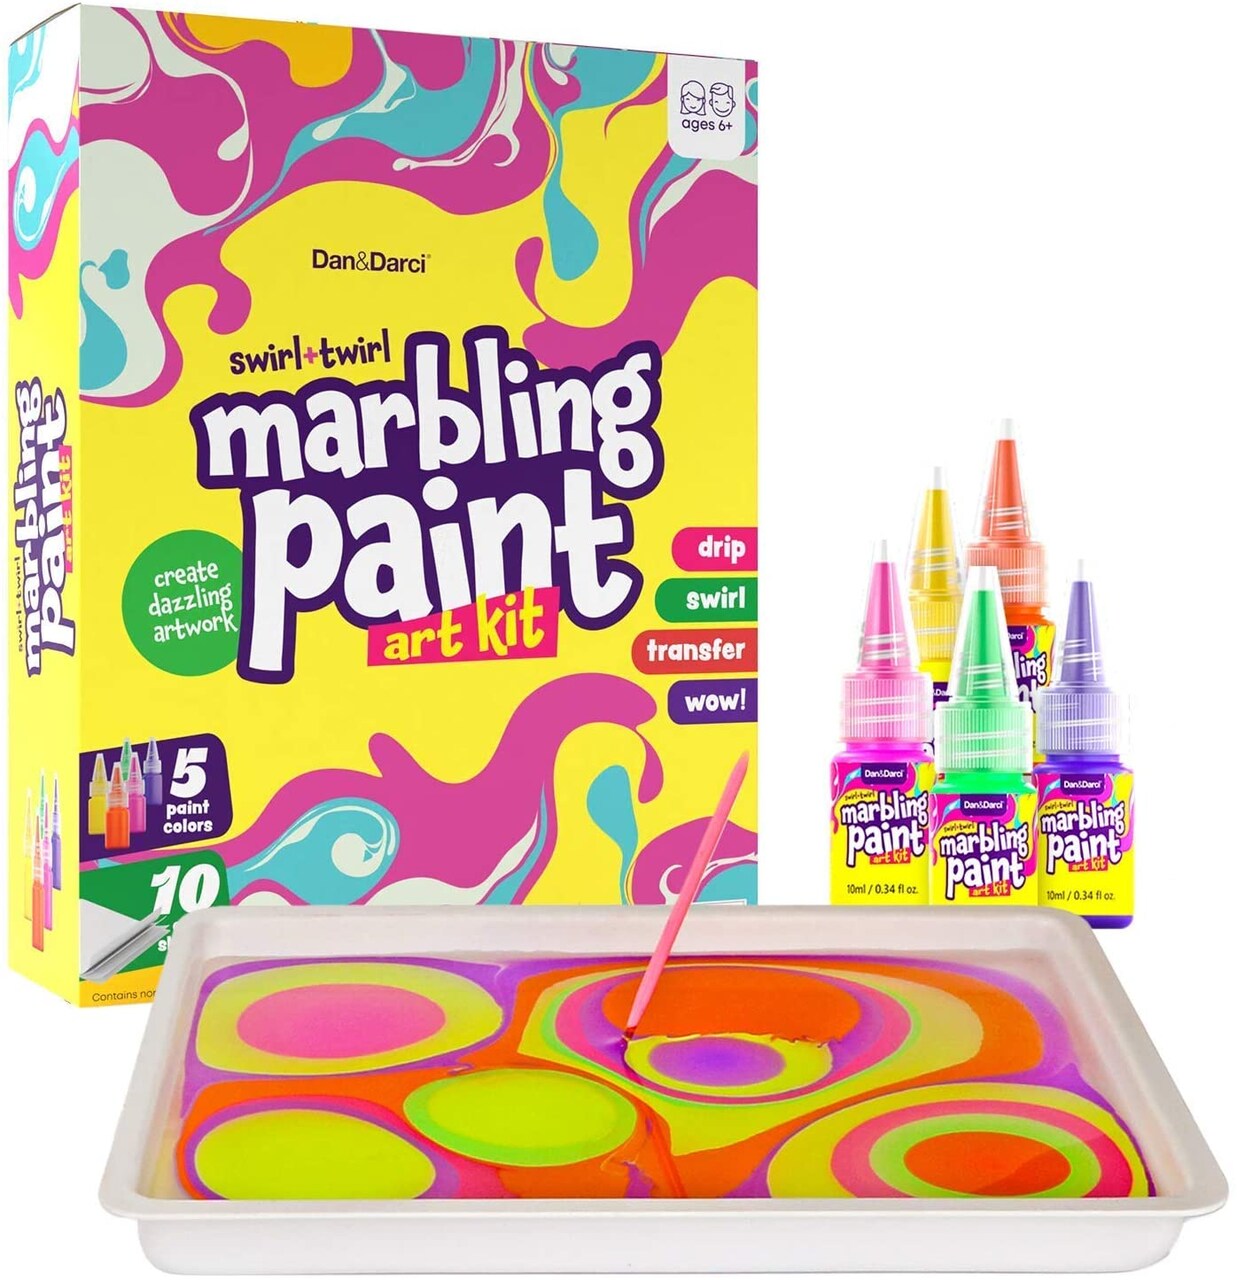 Marbling Paint Art Kit for Kids - Arts and Crafts for Girls & Boys Ages  6-12 - Craft Kits Art Set - Best Tween Paint Gift Ideas for Kids Activities